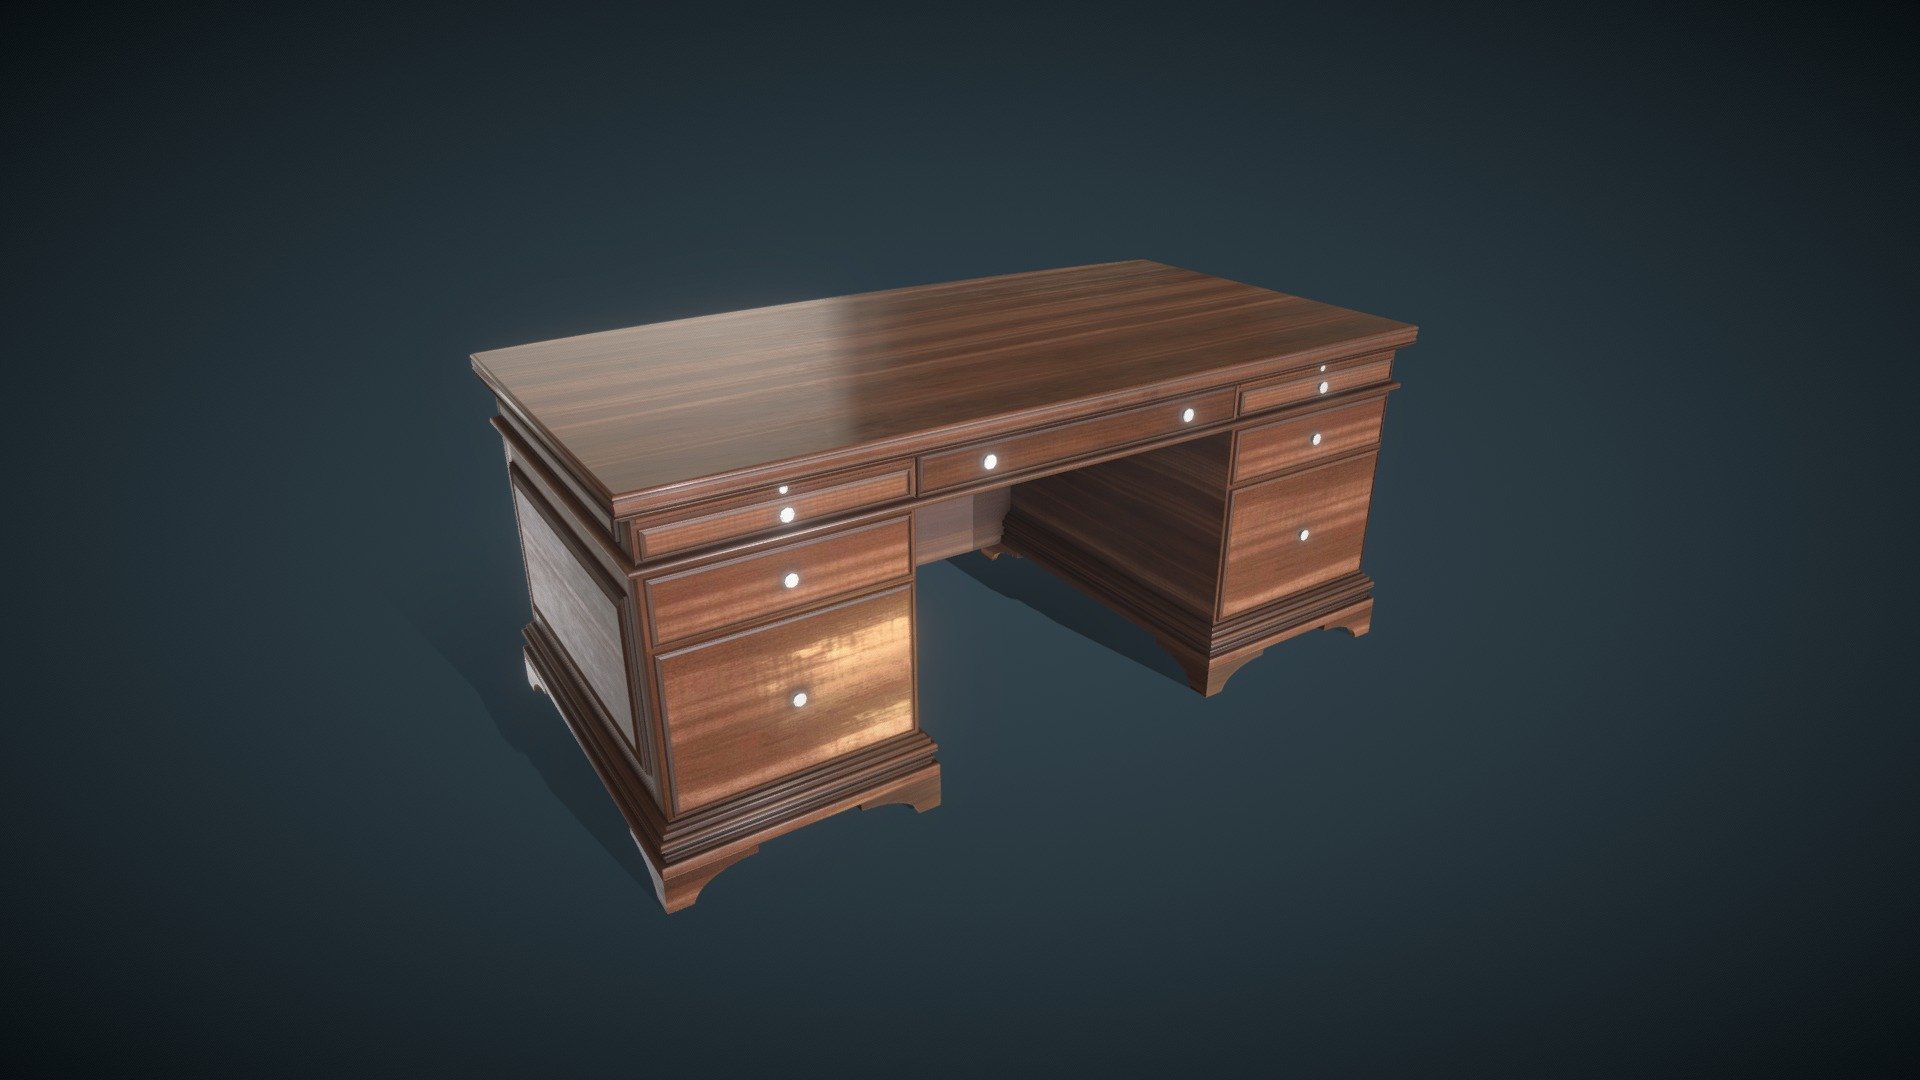 Classic Office Desk

Assets:
Classic Office Desk
193.4cm Width(X), 103.6cm Length(Y), 82.7cm Height(Z)
76.2in Width(X), 40.8in Length(Y), 32.6in Height(Z)
Polycount: 6,118
Triangle count: 12,114
Vertex count: 6,486
Bones: 10

Materials:
Includes 1 Materials/Texture sets
Classic Office Furniture Mat

Textures:
Included texture types: Base Color, Diffuse, Ambient Occlusion, Glossiness, Height, Metallic, Normal Map (OpenGL), Normal Map (Direct-X), Roughness, Specular-Level, Emissive
Included Texture Sizes: 1024px, 2048px, 4096px
Included Texture Formats: JPG, EXR, 

Average Texel Density:
10.24 px/cm @ 4096x4096 image resolution

Please contact me if you have any questions or business inquiries: bsw2142@gmail.com

You Can Also Get A Quote From Me Via Questioneer! Google Forms - Classic Office Desk - Buy Royalty Free 3D model by Brandon Westlake (@dr.badass2142) 3d model